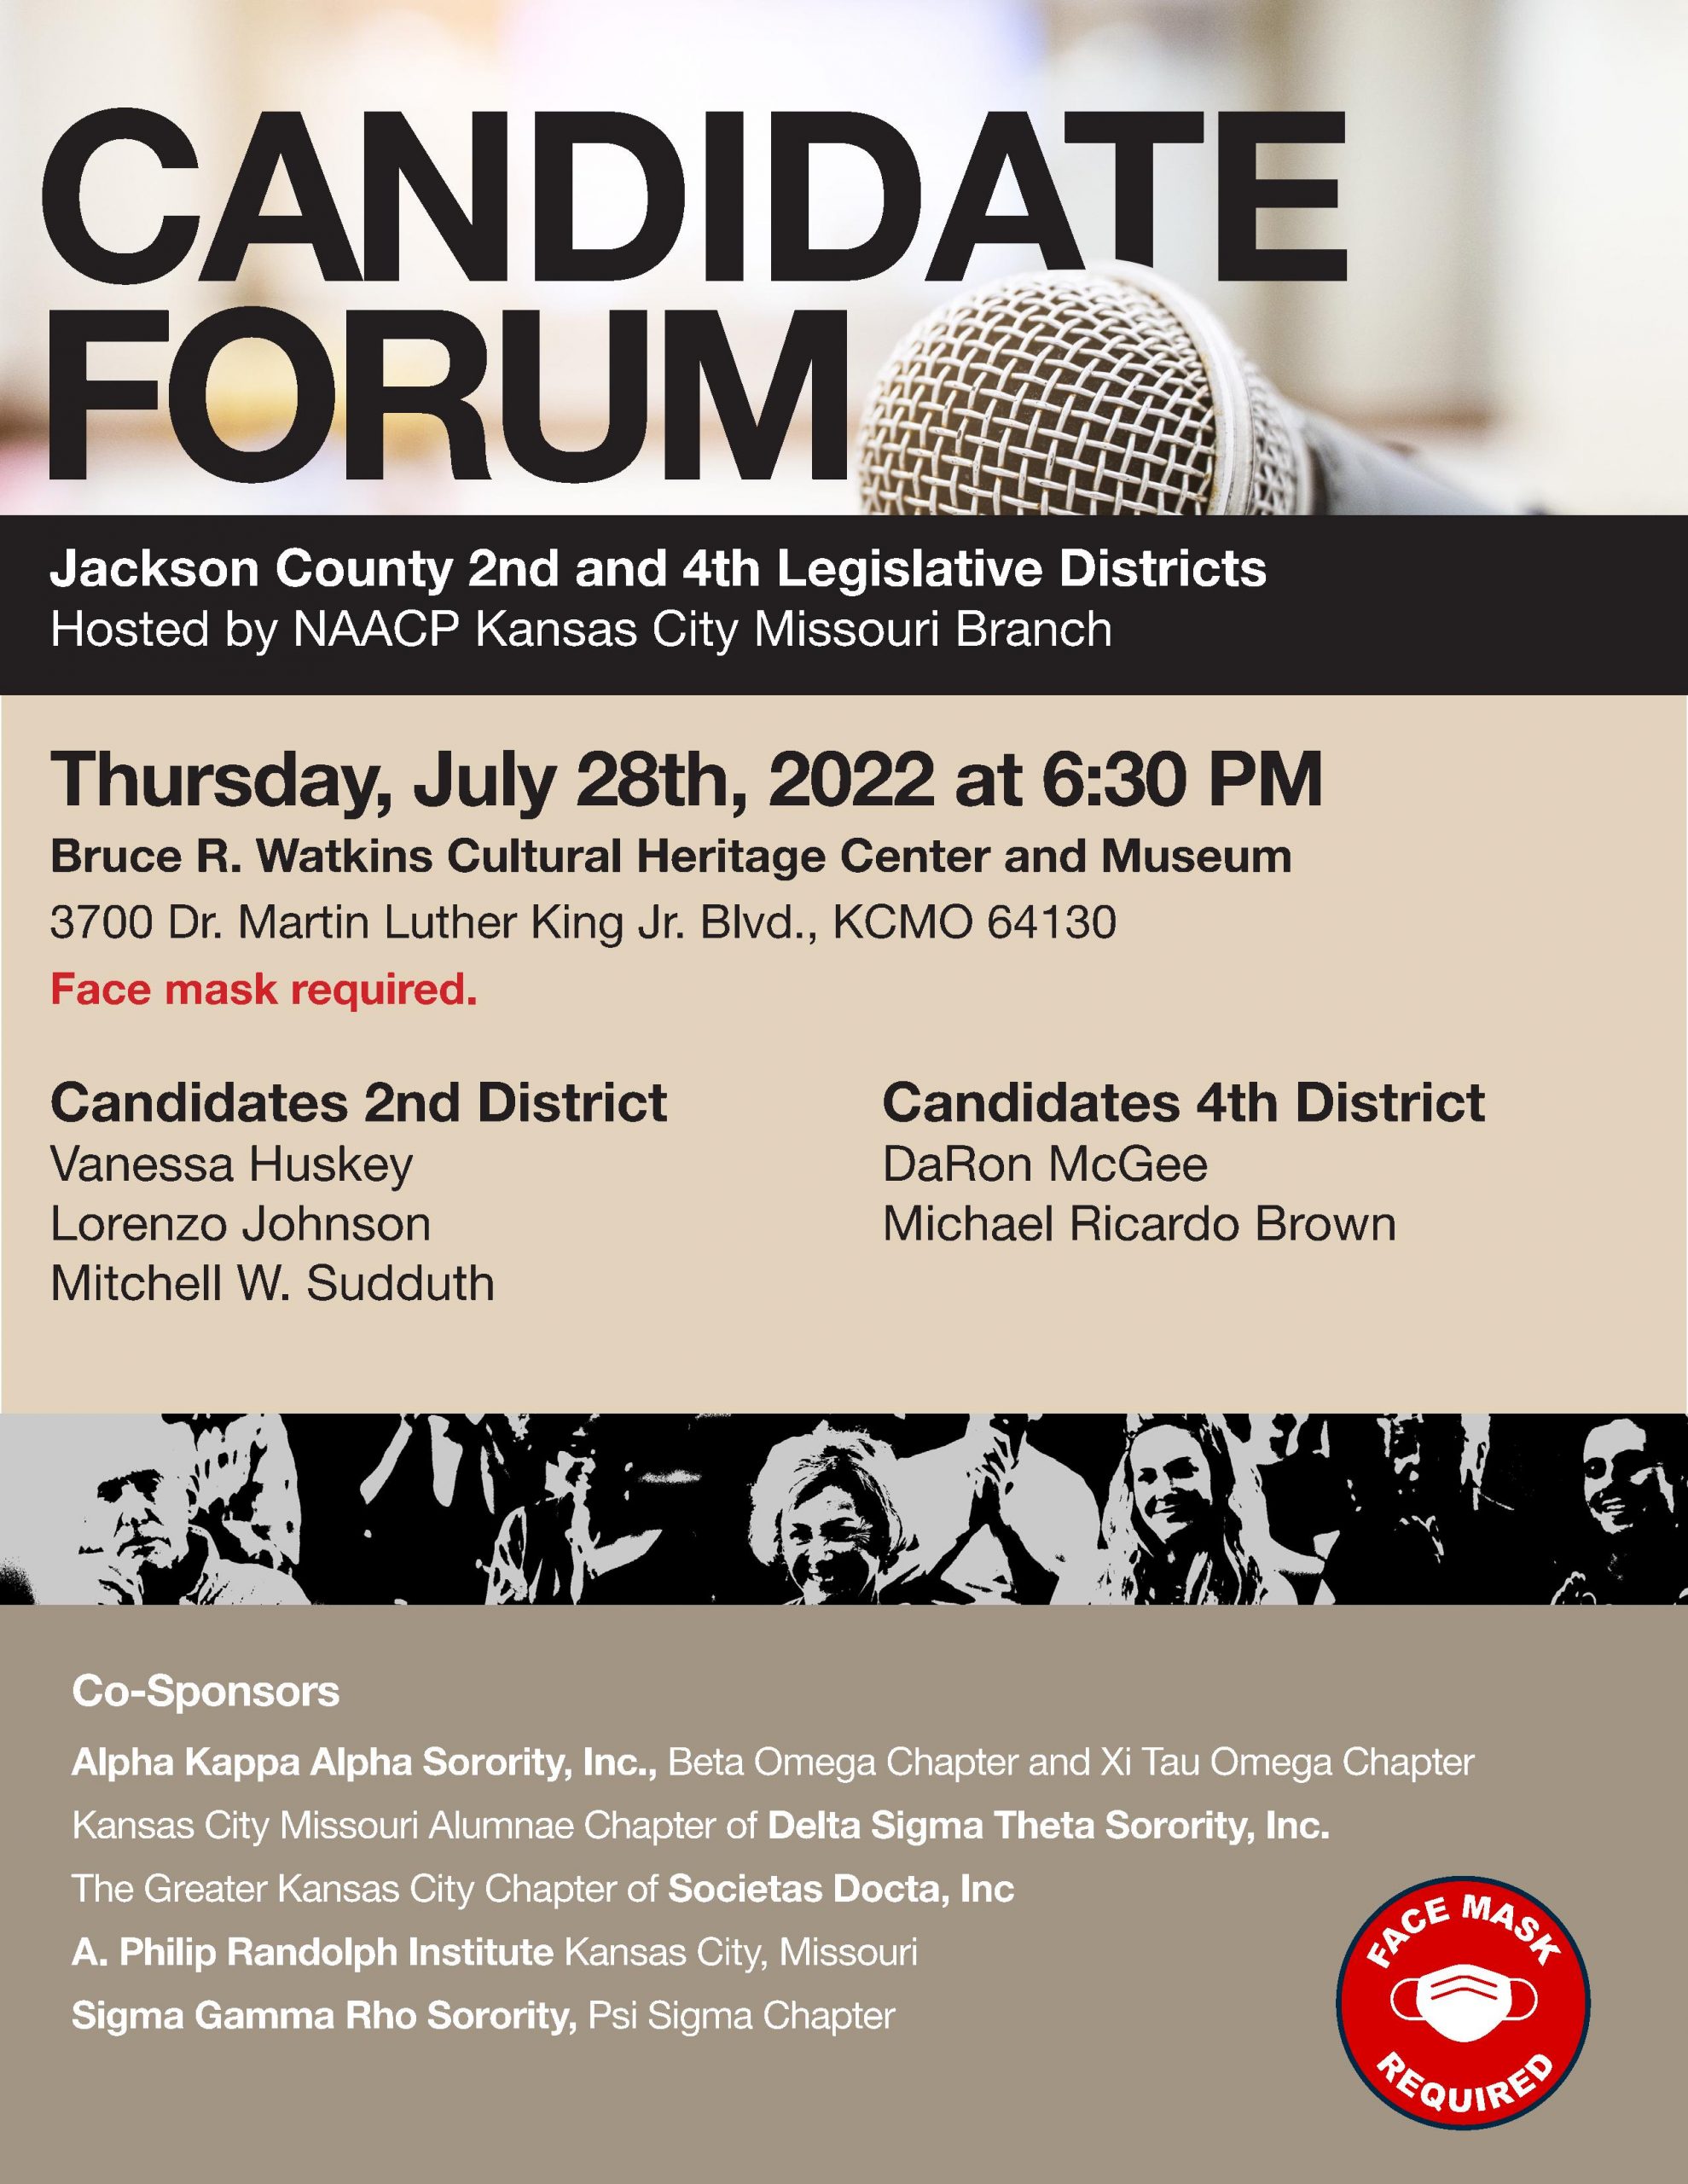 NAACP KC Candidate Forum